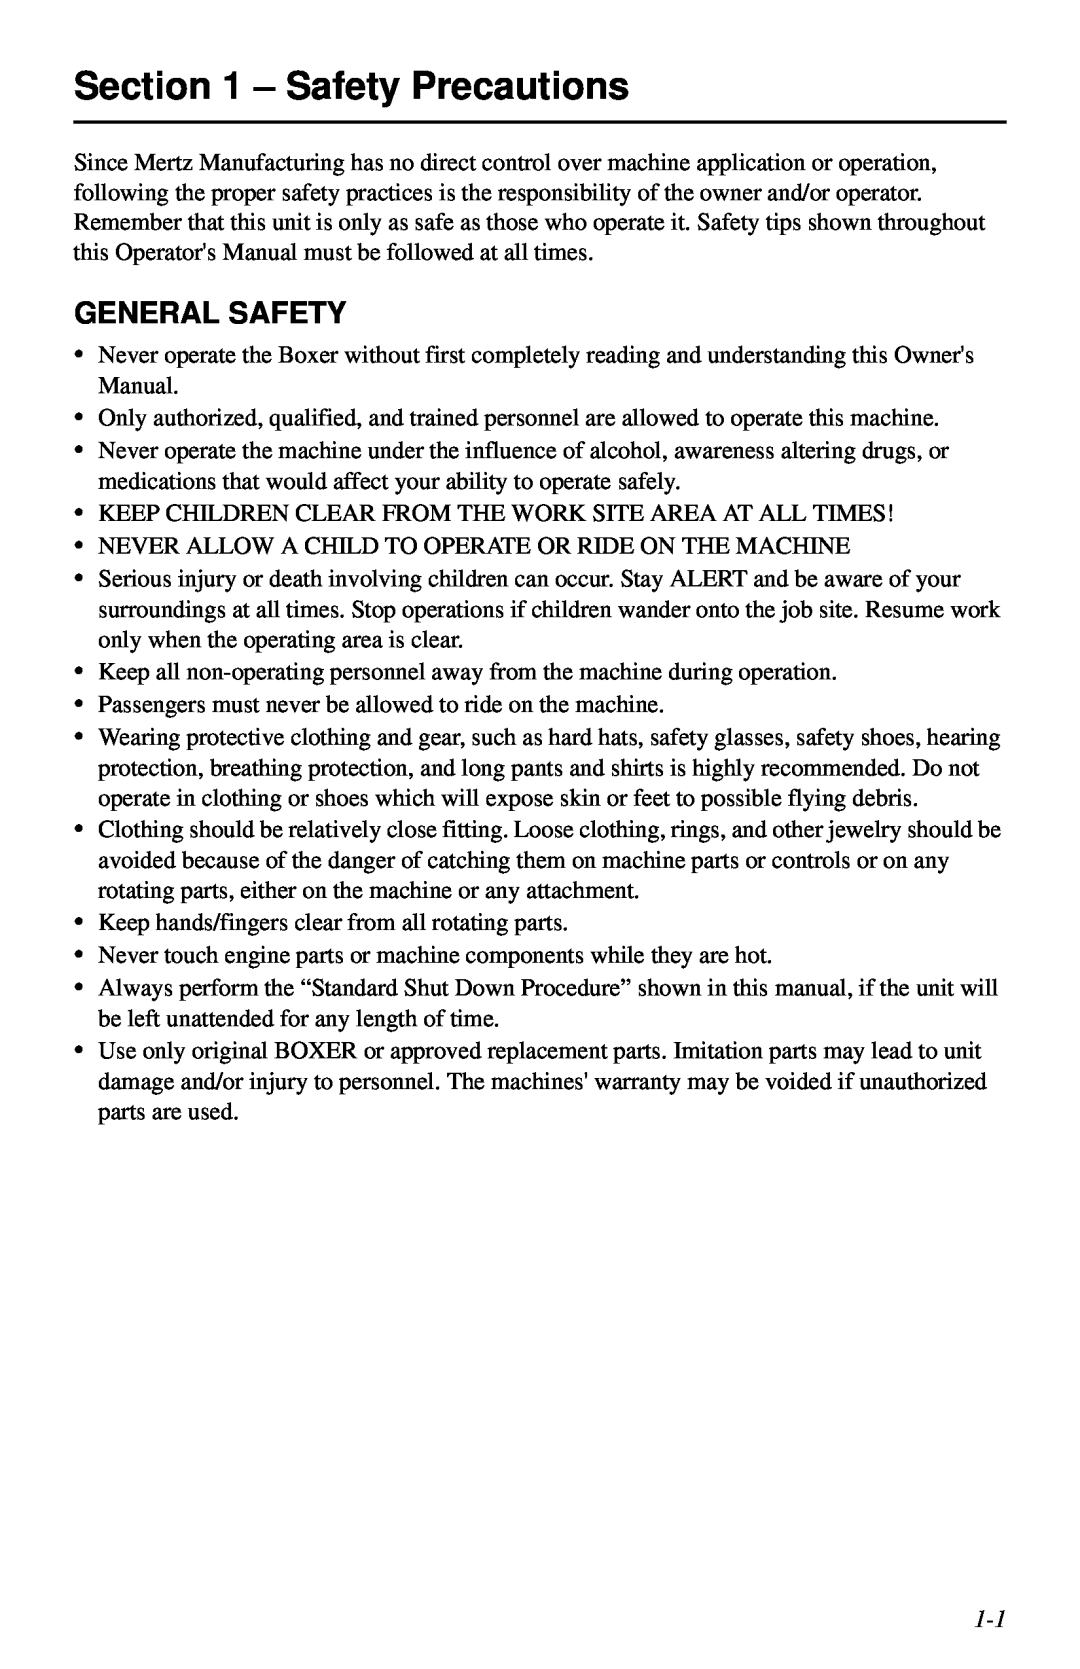 Cellboost 999-823 manual Safety Precautions, General Safety 